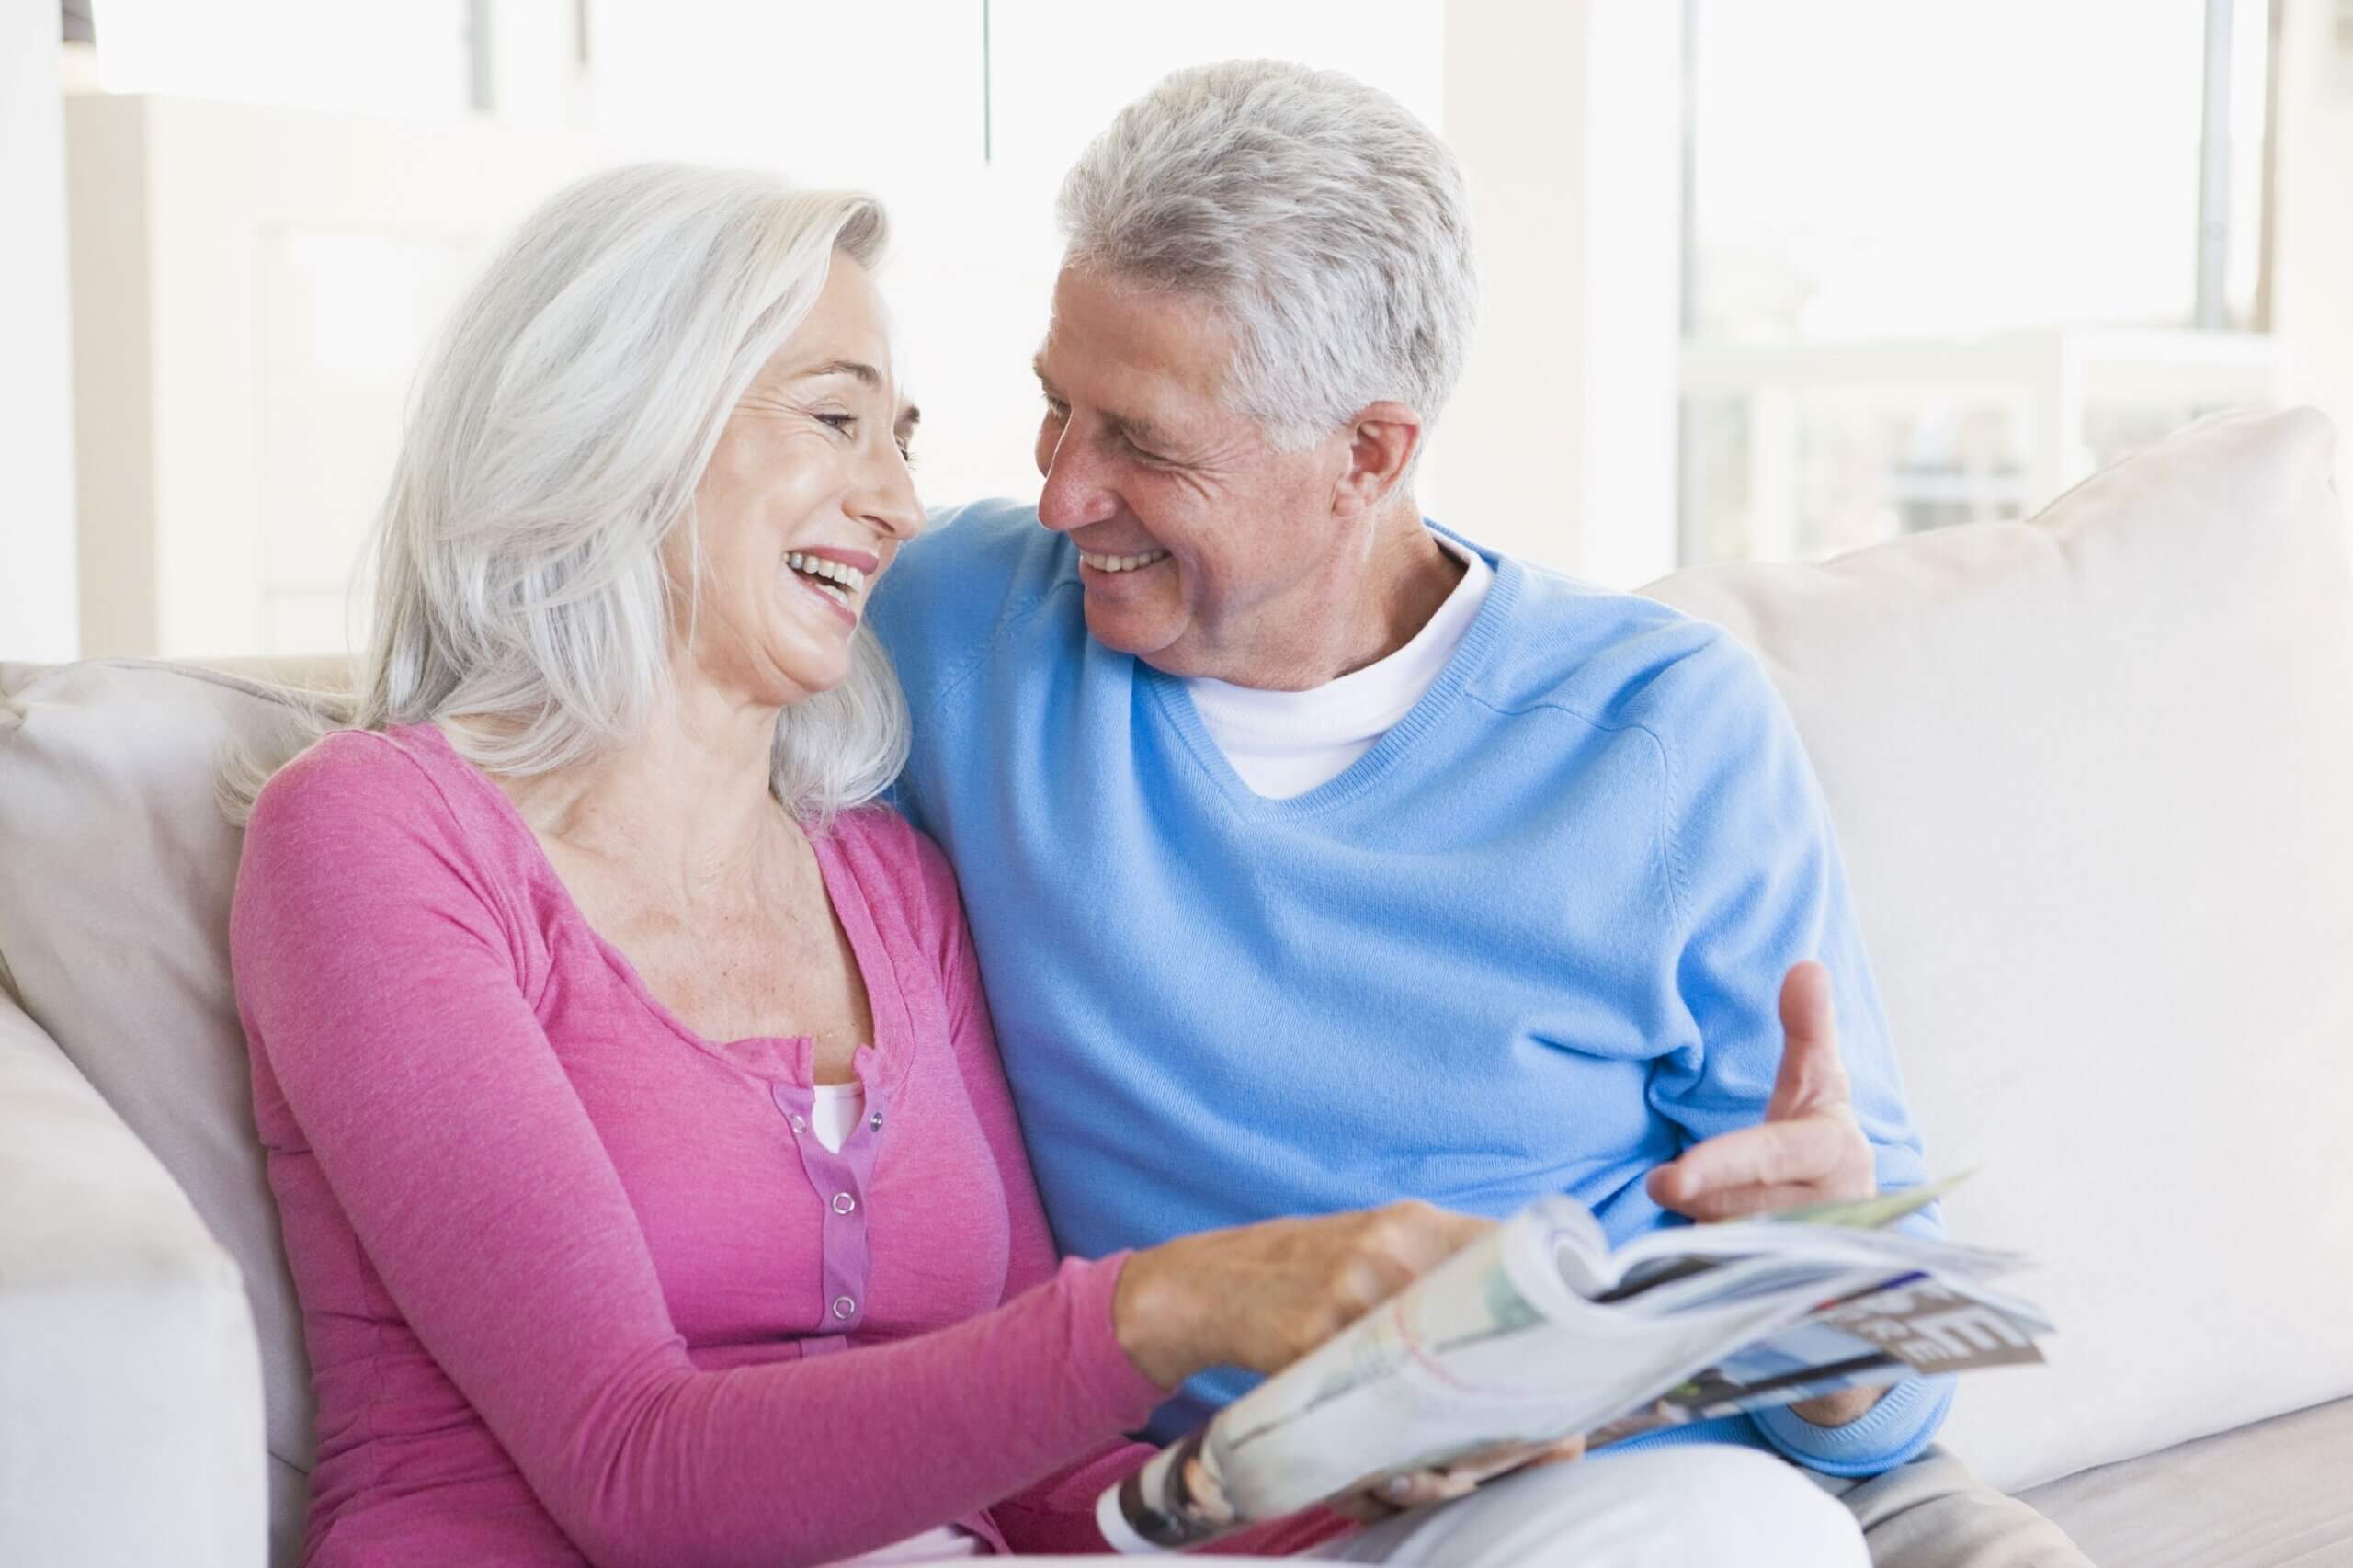 Mature Couple Smiling About Magazine Article While Sitting On Couch